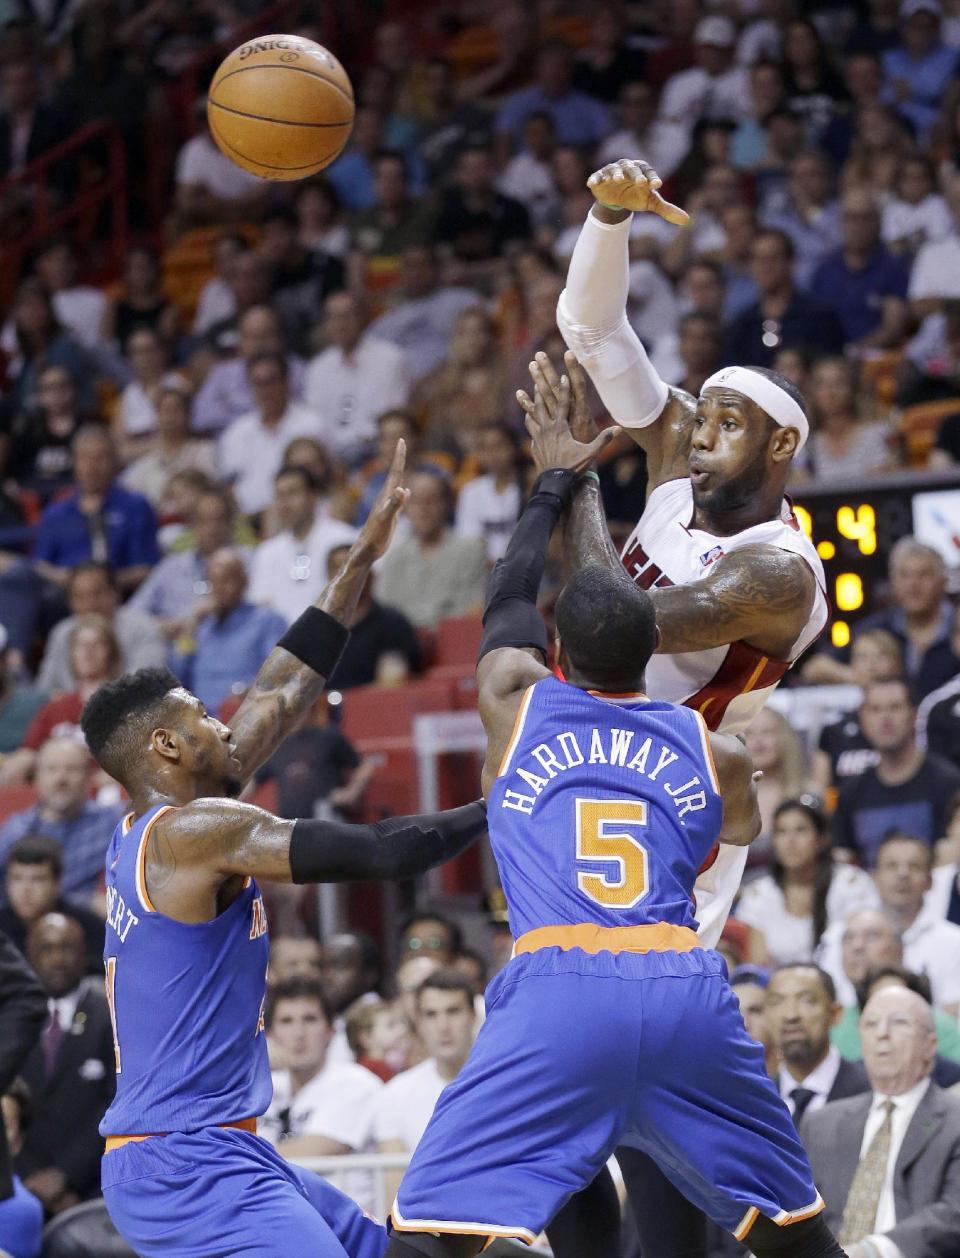 Miami Heat forward LeBron James passes past New York Knicks guard Iman Shumpert, left, and guard Tim Hardaway Jr. (5) during the first half of an NBA basketball game, Sunday, April 6, 2014, in Miami. (AP Photo/Wilfredo Lee)